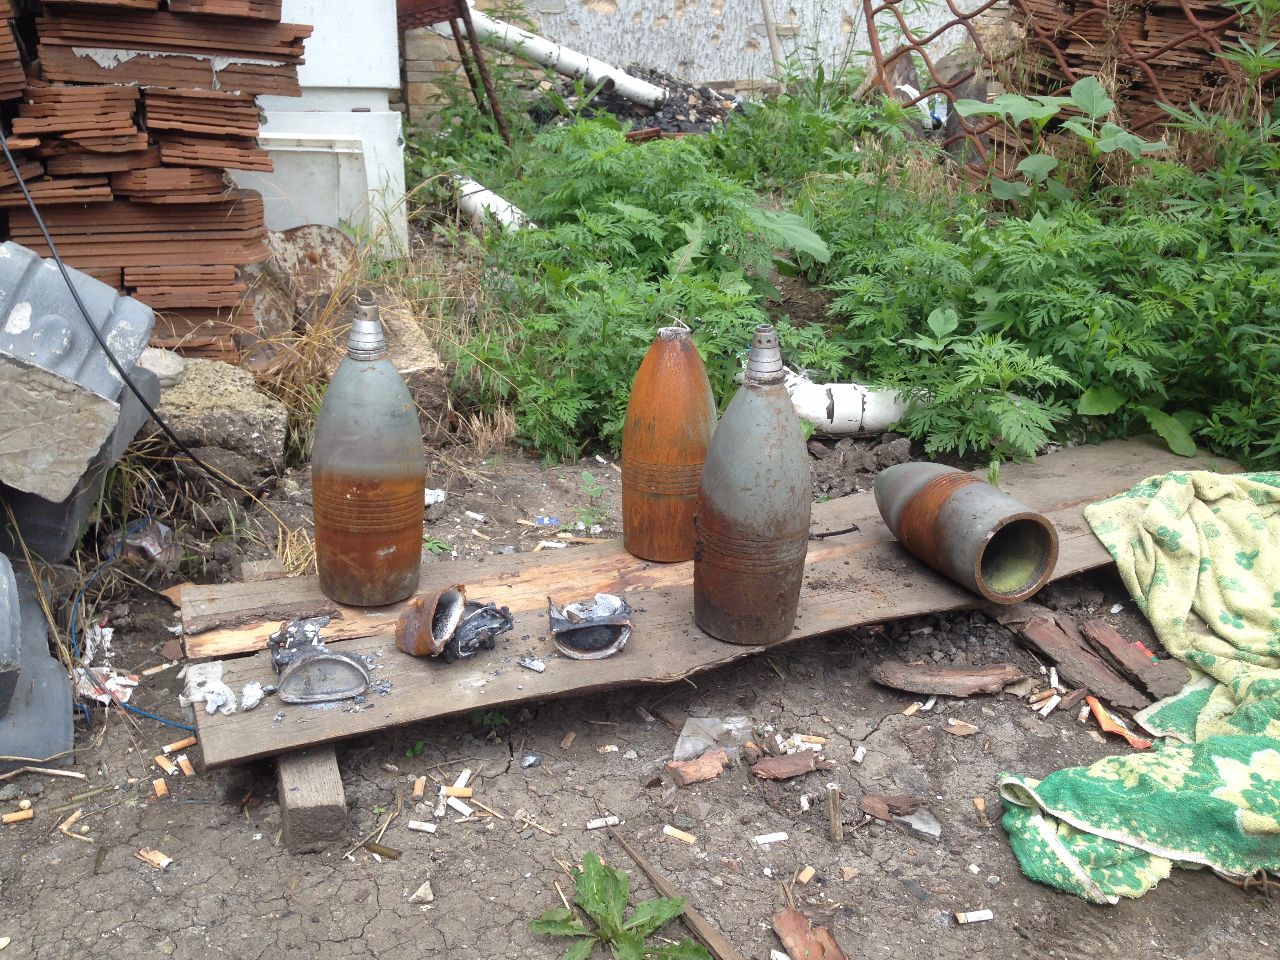 Unexploded banned 120 mortars, Julian Evans on the Ukrainian Conflict with Russia, War in Donbas